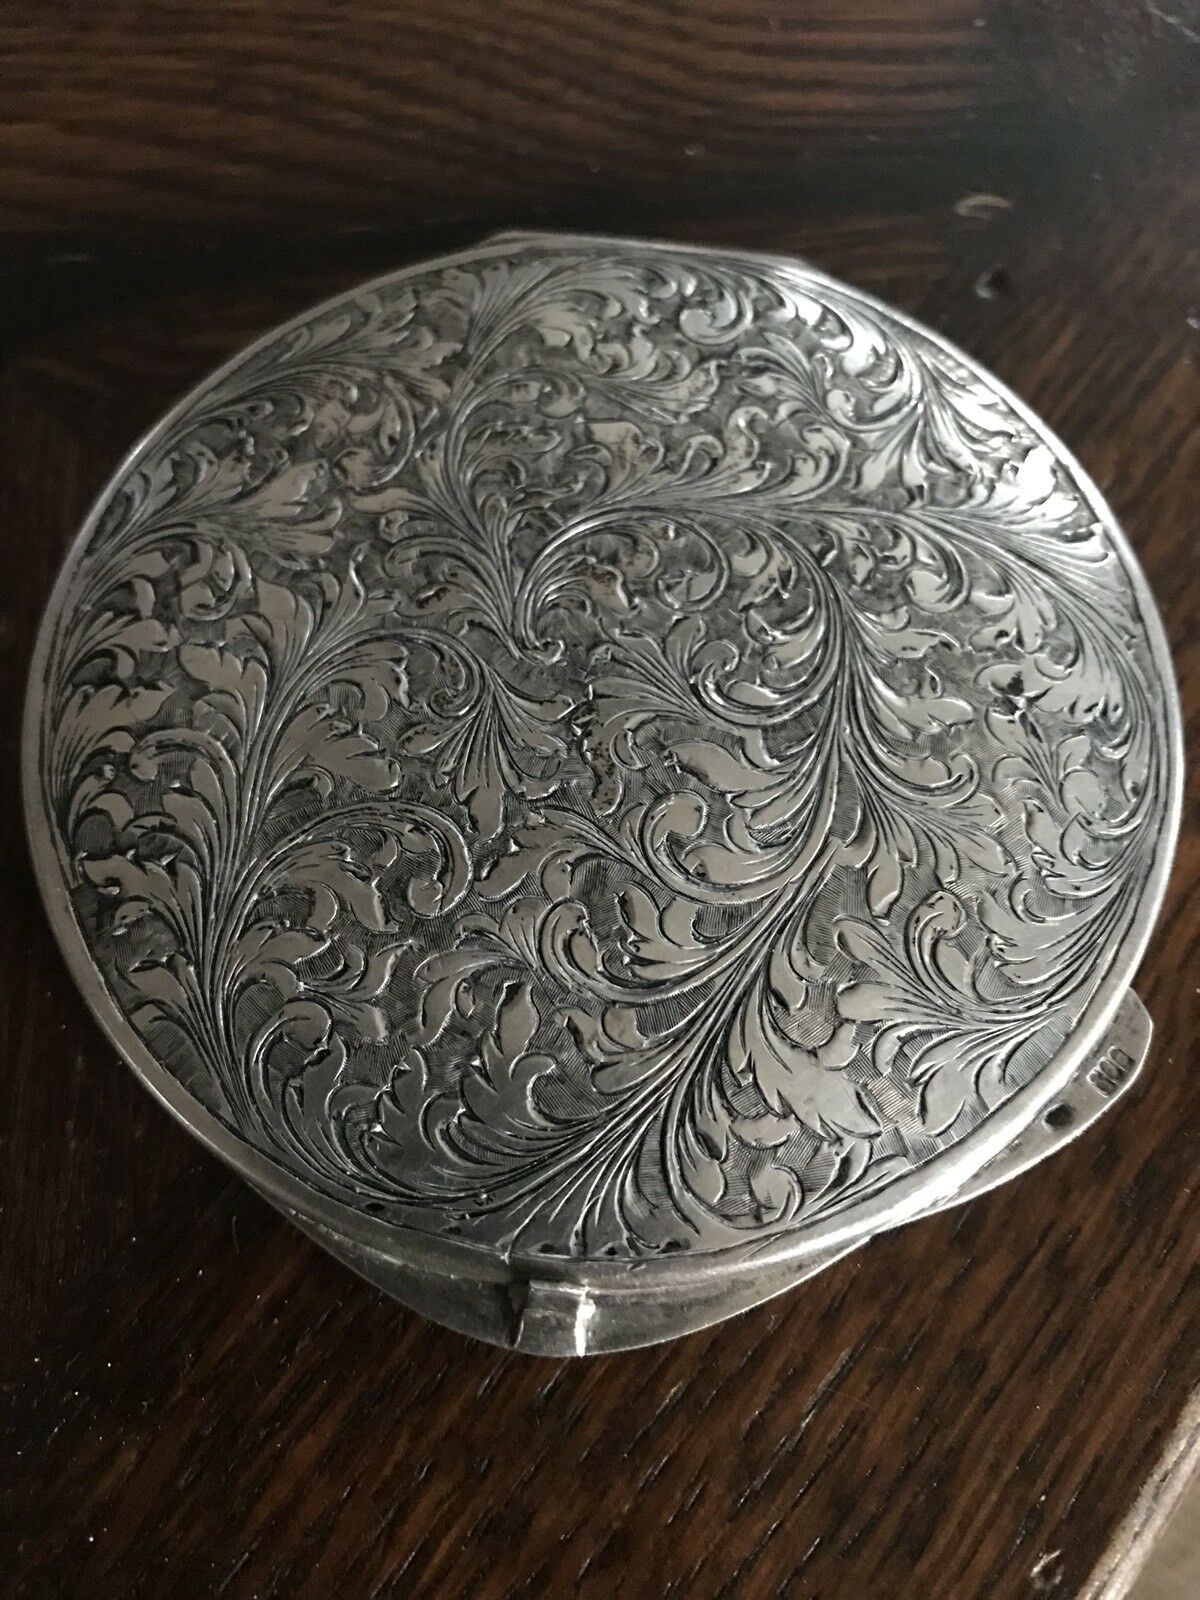 Vintage 1940’s Hand Engraved 800 Silver Compact Make-up Cosmetics Skin Care